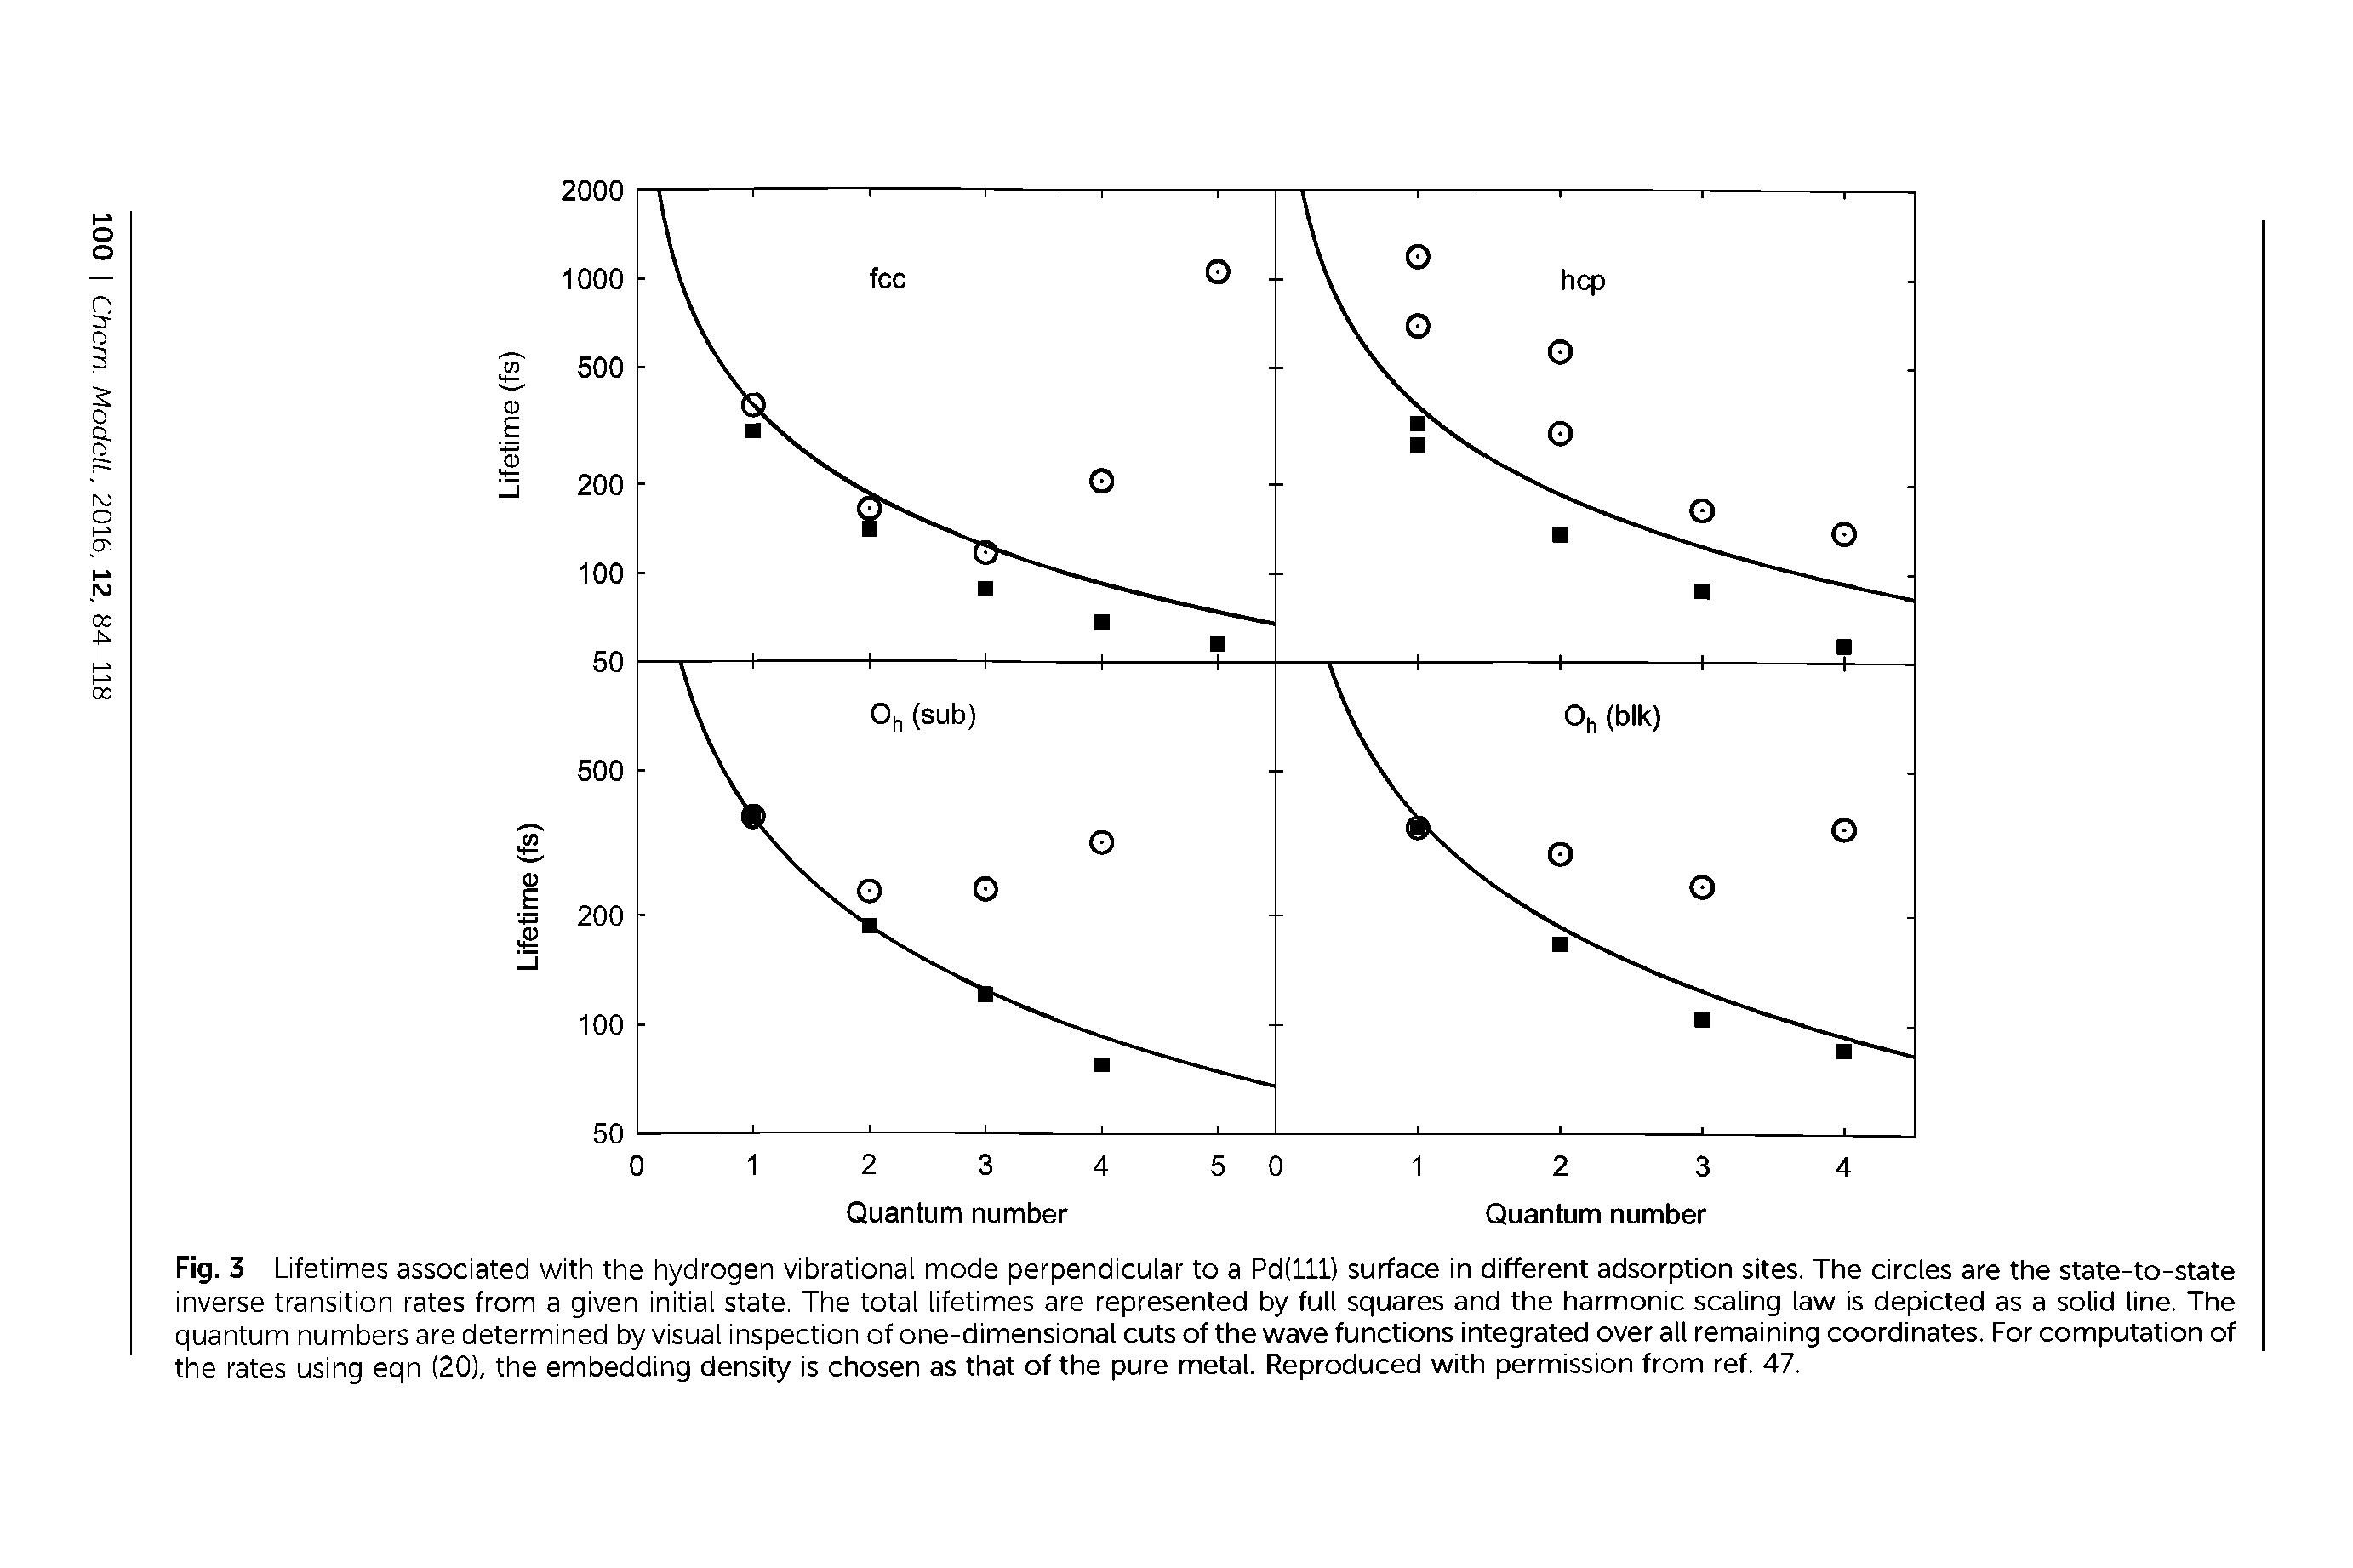 Fig. 3 Lifetimes associated with the hydrogen vibrational mode perpendicular to a Pd(Ul) surface in different adsorption sites. The circles are the state-to-state inverse transition rates from a given initial state. The total lifetimes are represented by full squares and the harmonic scaling law is depicted as a solid line. The quantum numbers are determined by visual inspection of one-dimensional cuts of the wave functions integrated over all remaining coordinates. For computation of the rates usihg eqn (20), the embedding density is chosen as that of the pure metal. Reproduced with permission from ref. 47.